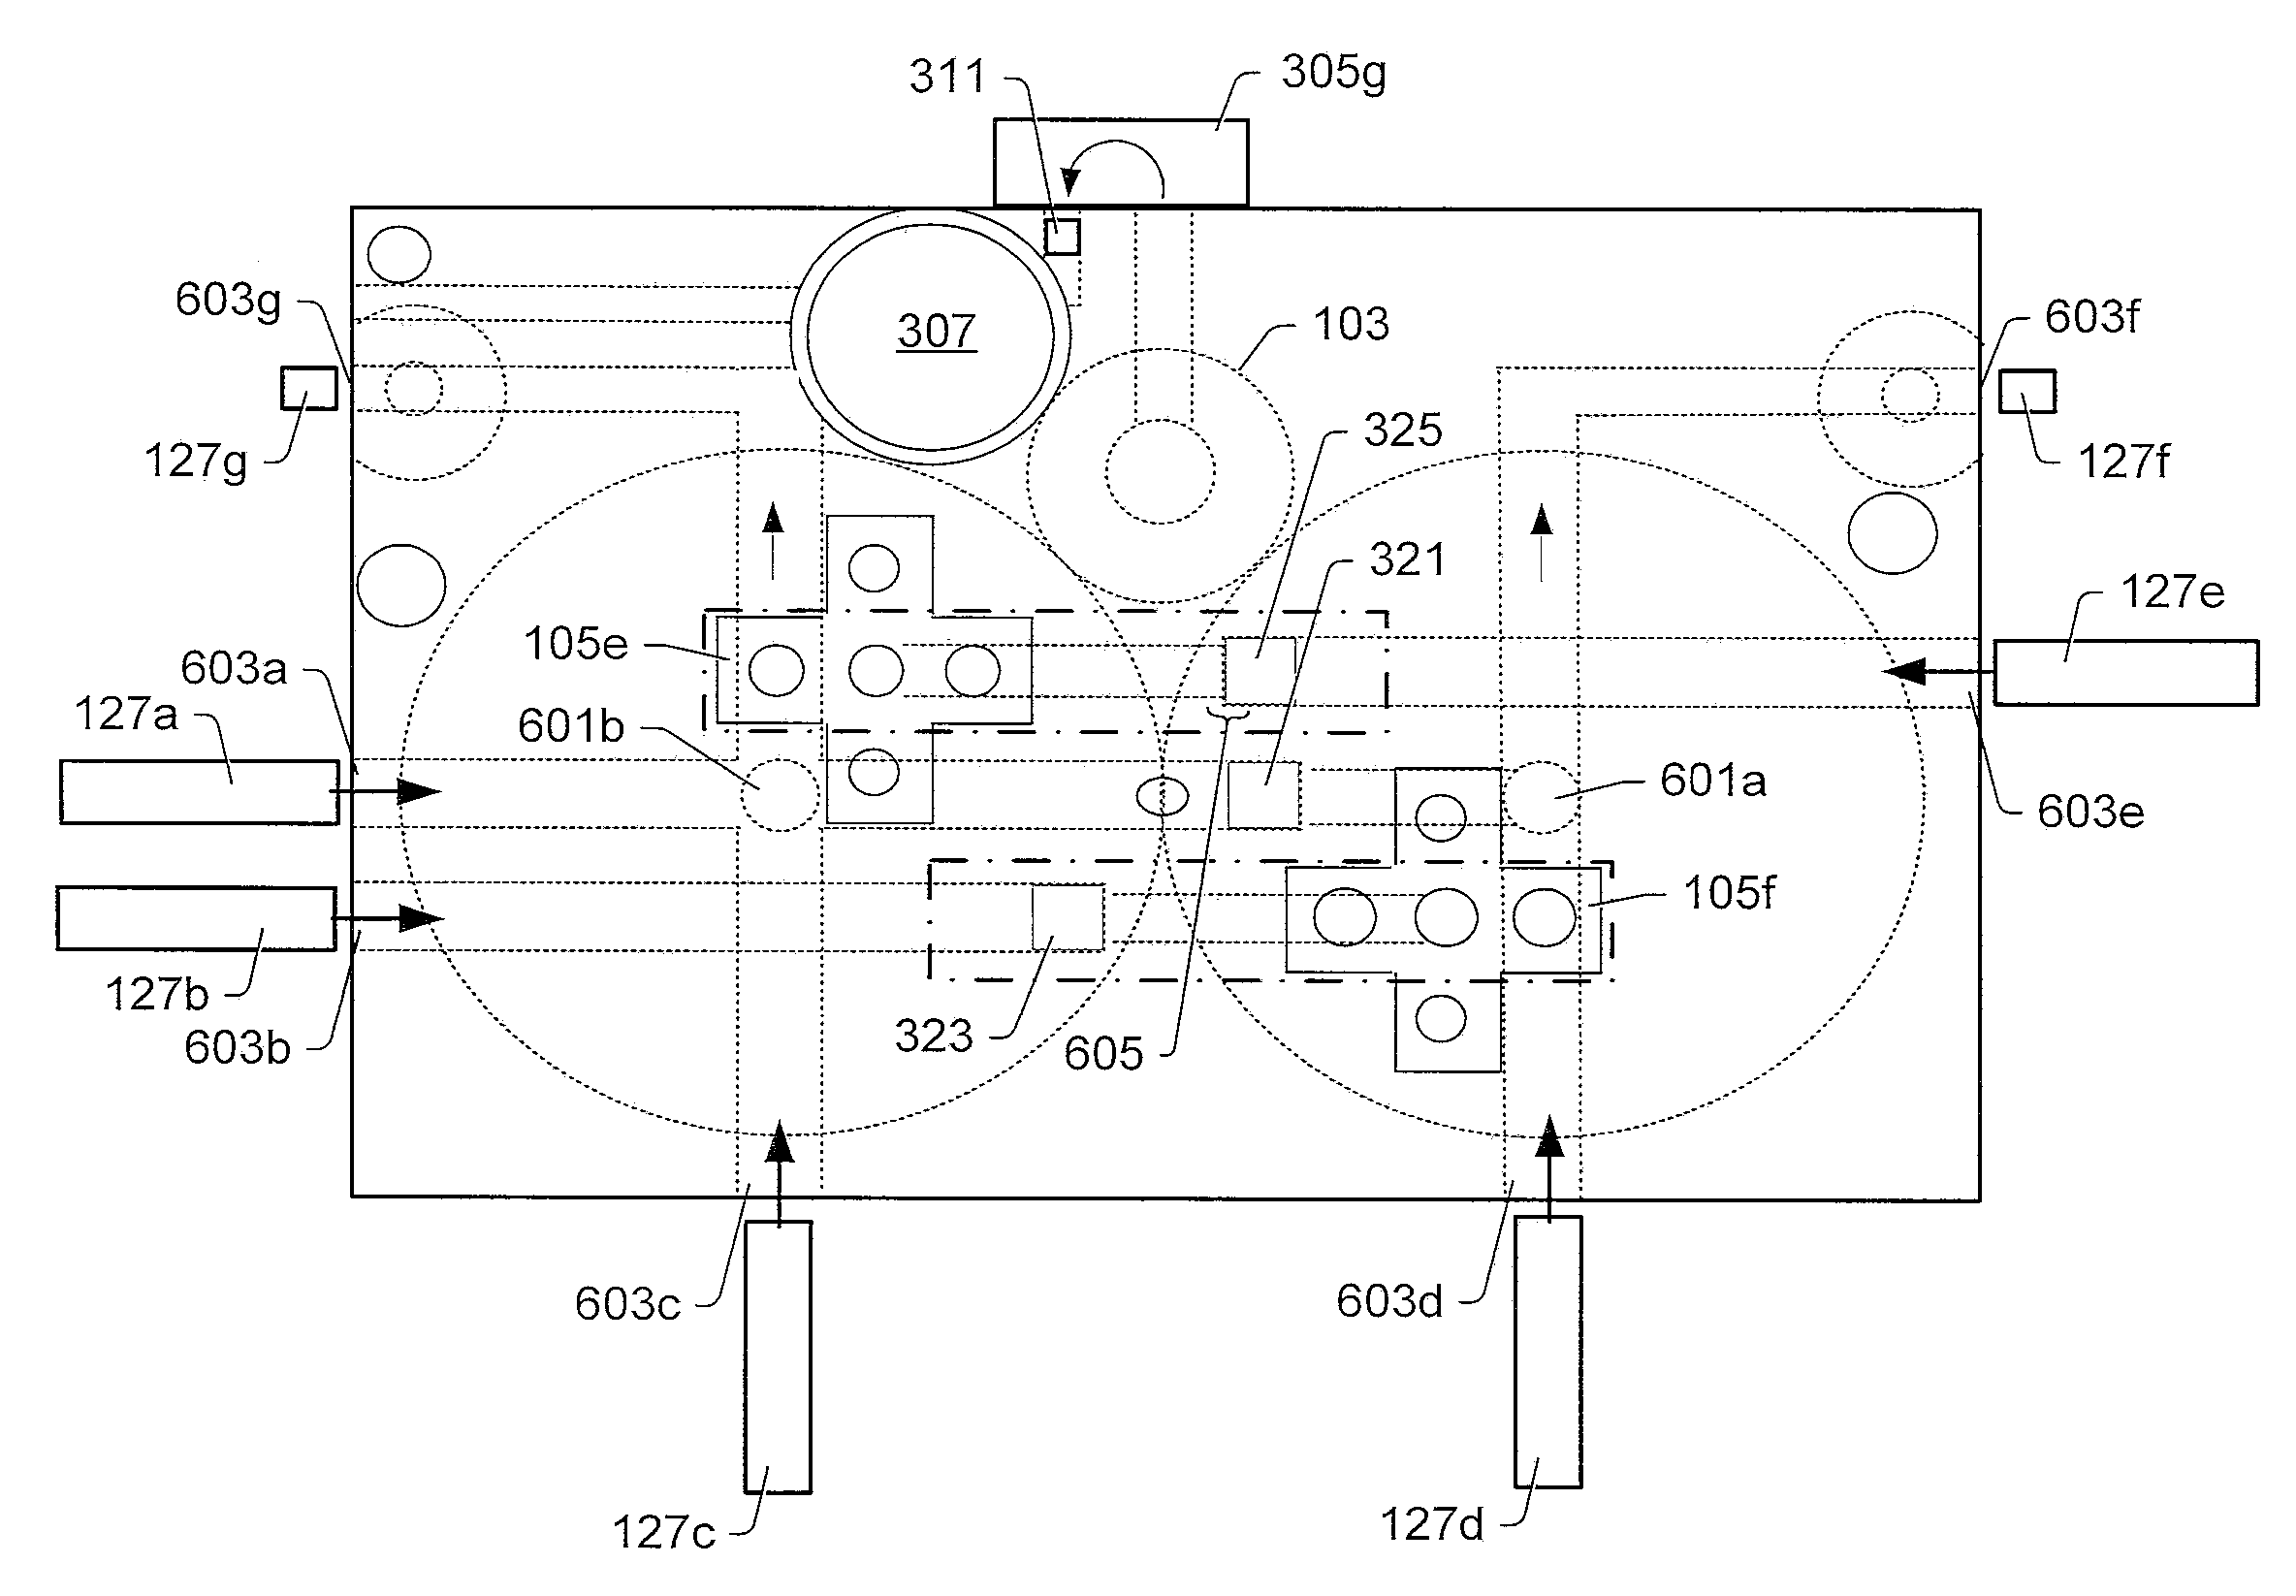 Oxygen concentrator apparatus and method having variable operation modes